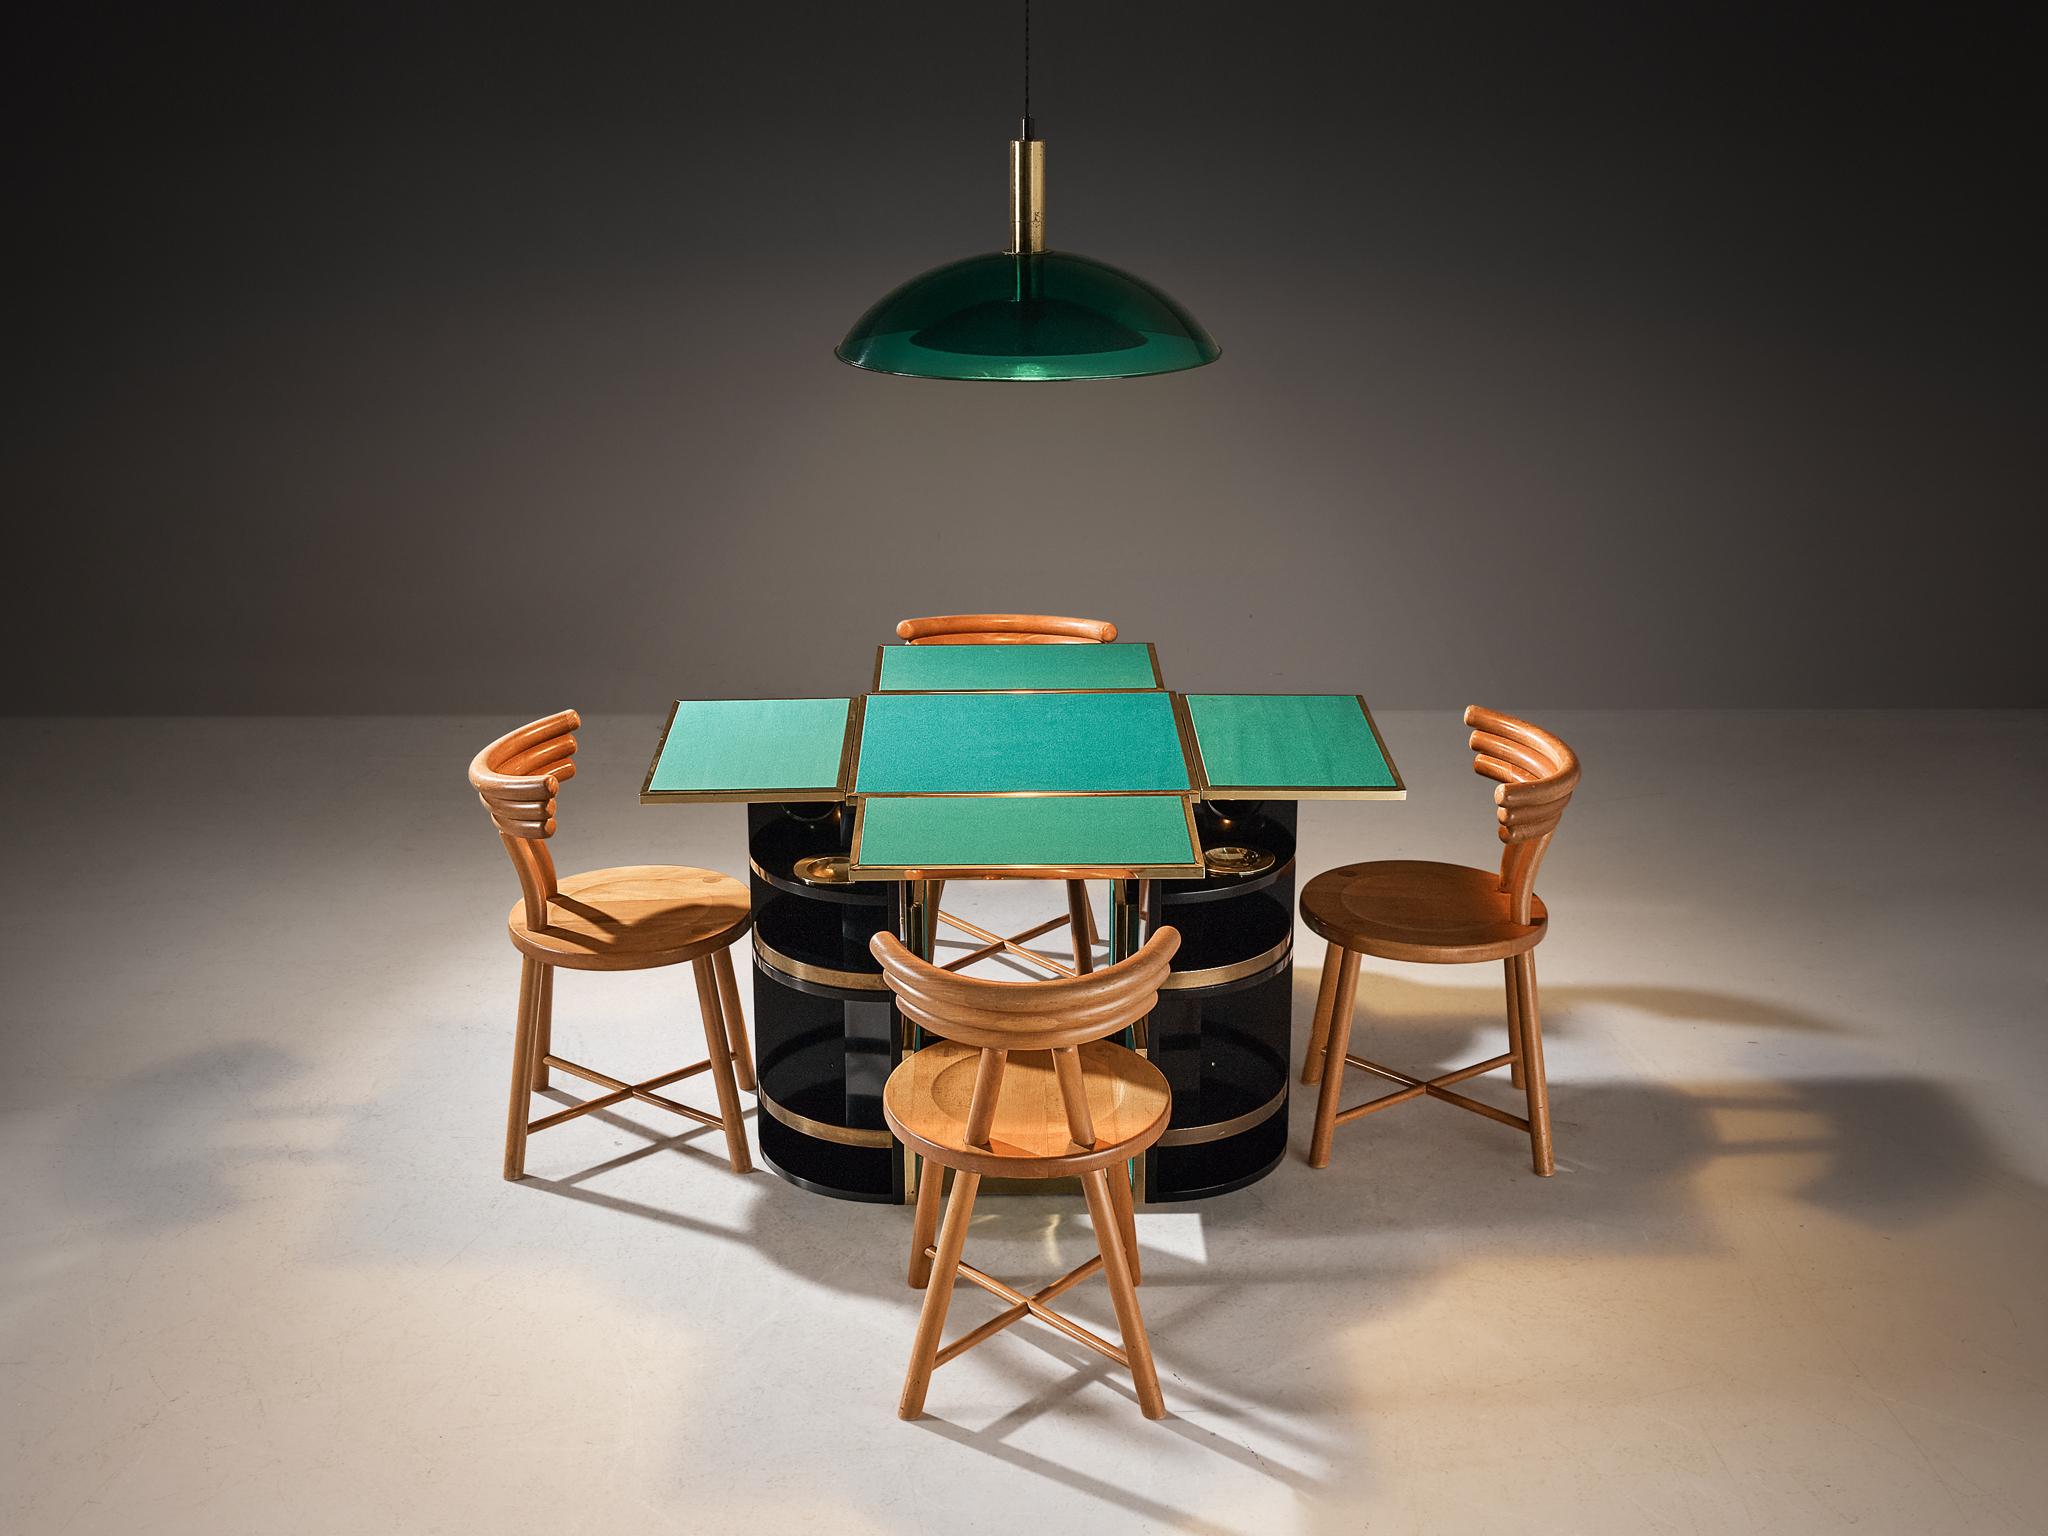 Metal Renato Meneghetti 'Cubo' Folding Game Table Set with Pendant and Chairs